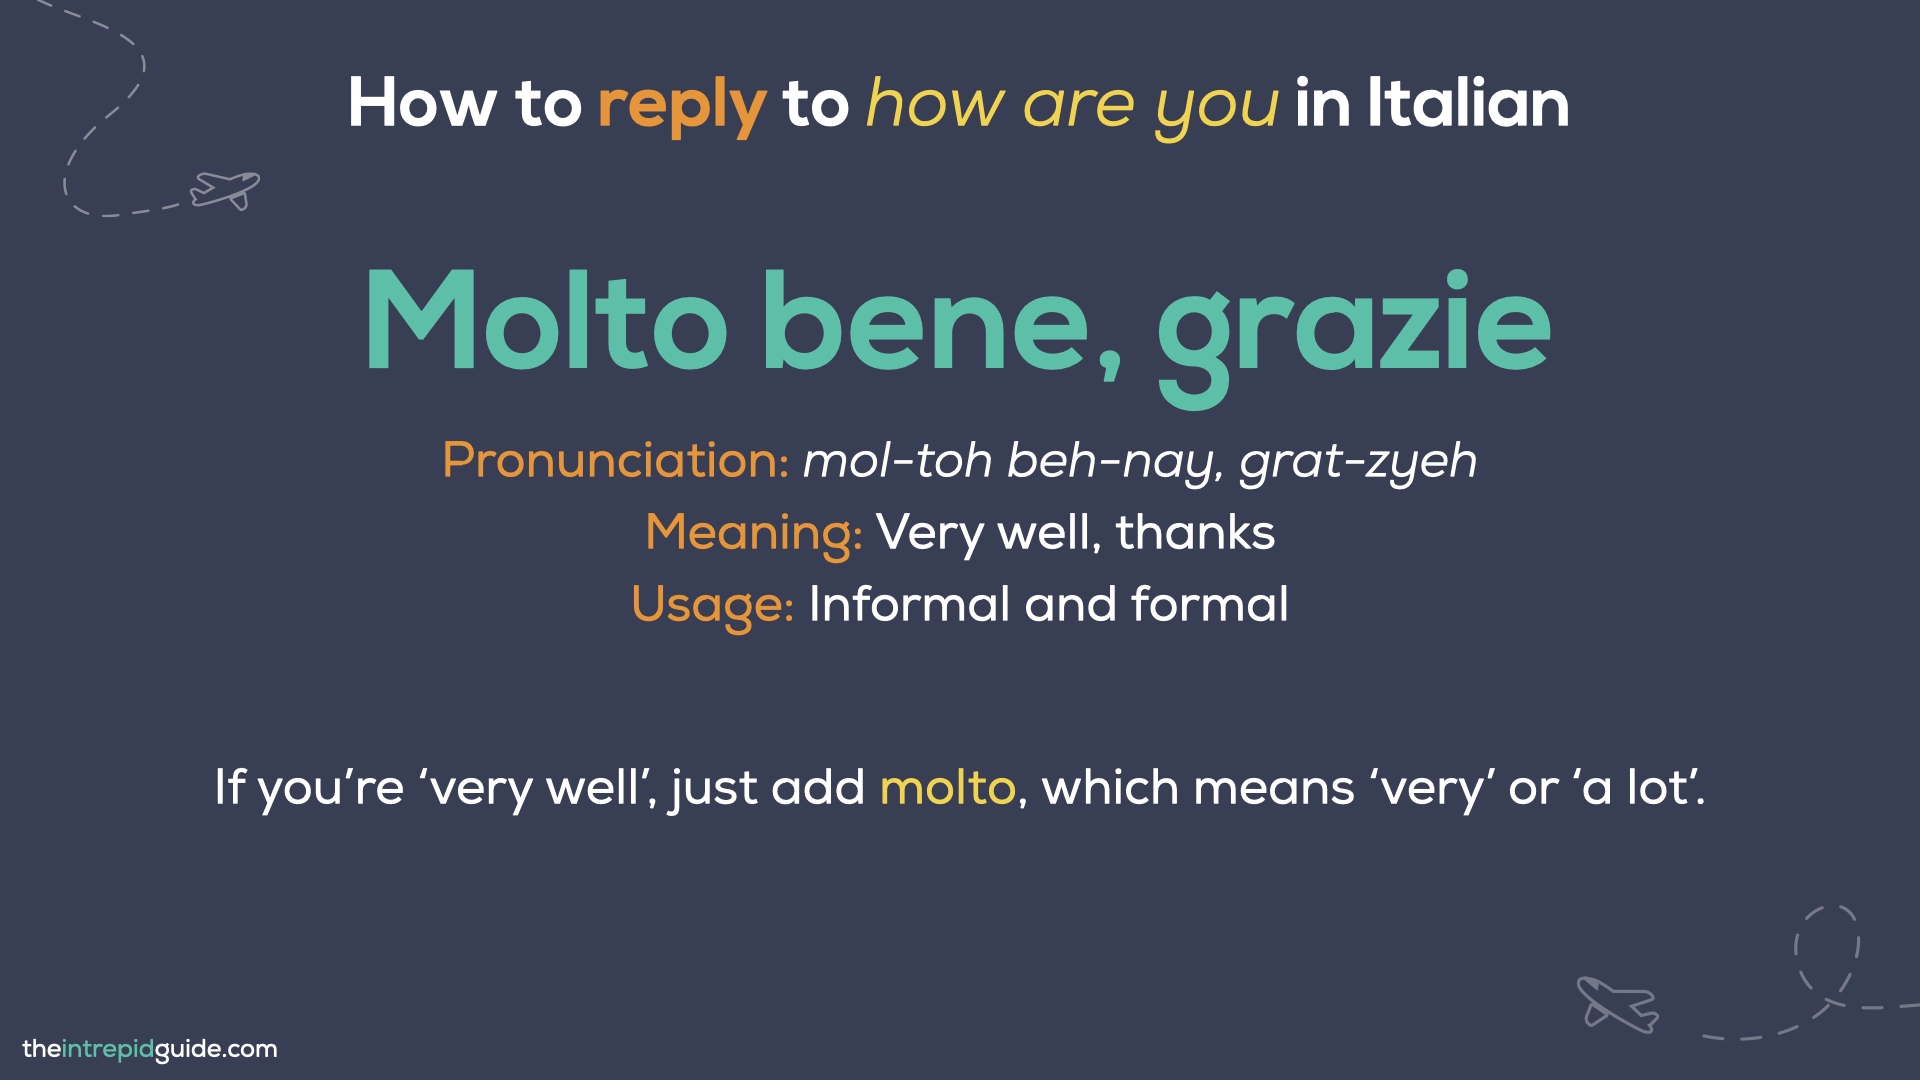 How to say How are you in Italian - Molto bene, grazie